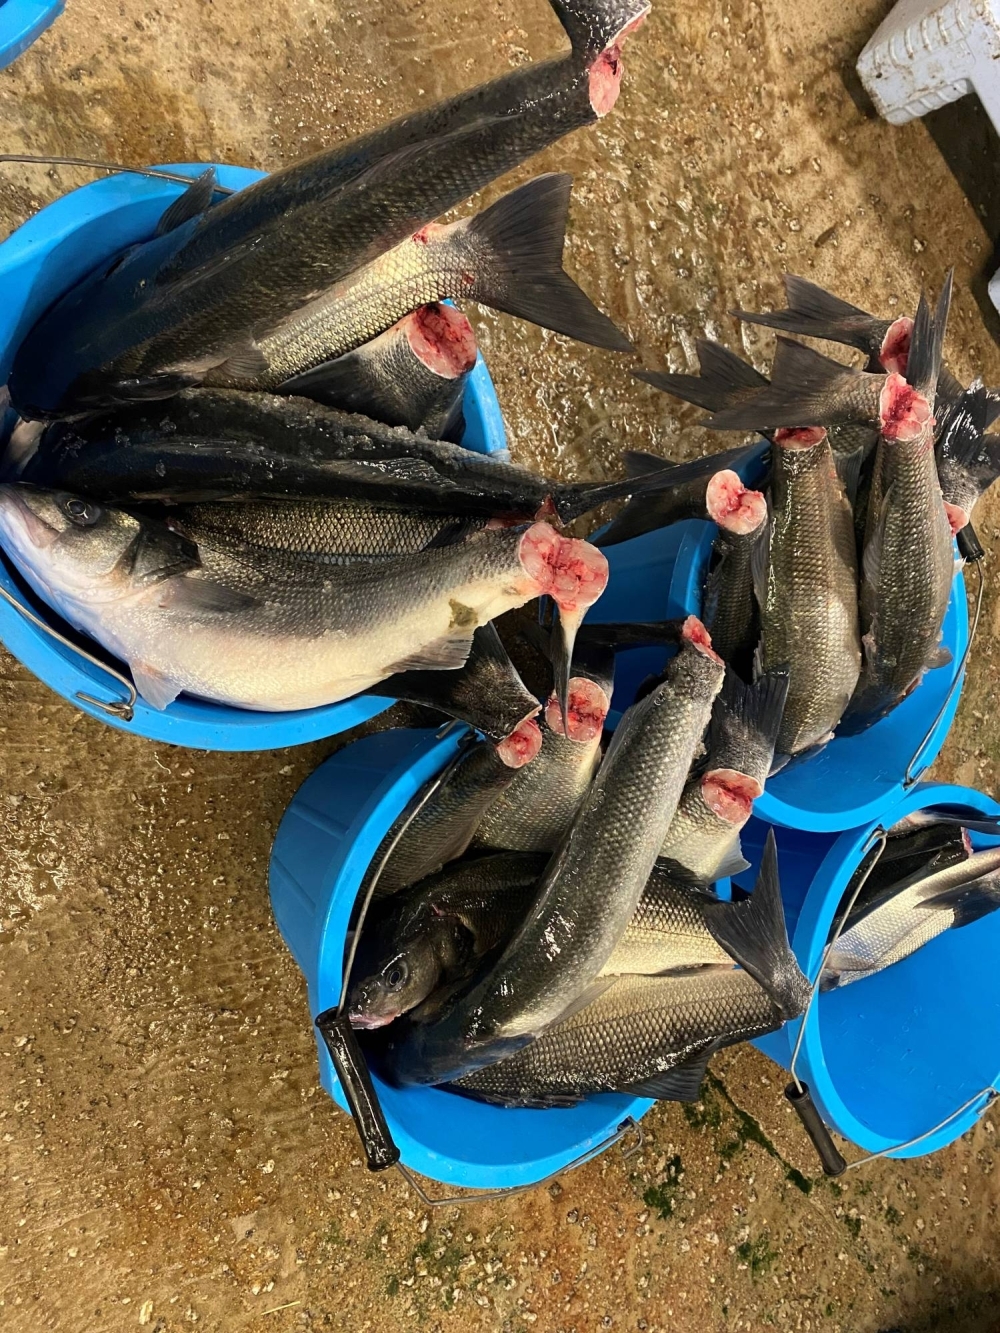 After a call from the Japanese head chef of London's Umu restaraurant, Kernowsashimi's fishers began culling their catches through ikejime.